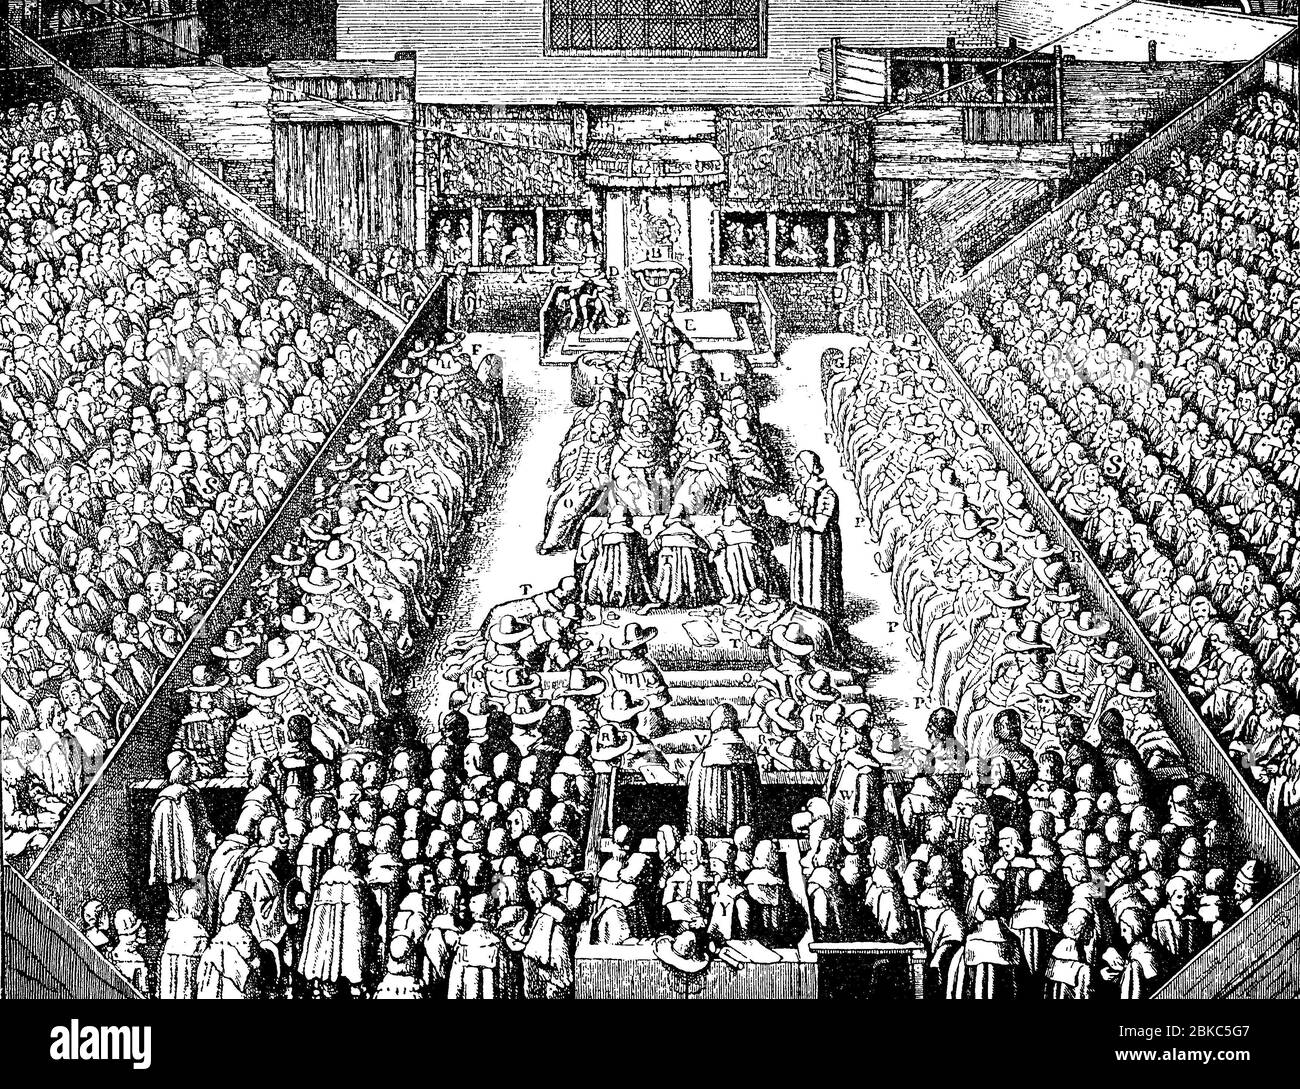 Trial of Lord Strafford at Westminster Hall, England, Thomas Wentworth, 1st Earl of Strafford, April 13, 1593- May 12, 1641, was one of the leaders in the run-up to the English Civil War  /  Prozeß gegen Lord Strafford in der Westminsterhalle, England, Thomas Wentworth, 1. Earl of Strafford, 13. April 1593- 12. Mai 1641, war einer der führenden Politiker im Vorfeld des englischen Bürgerkriegs, Historisch, historical, digital improved reproduction of an original from the 19th century / digitale Reproduktion einer Originalvorlage aus dem 19. Jahrhundert Stock Photo